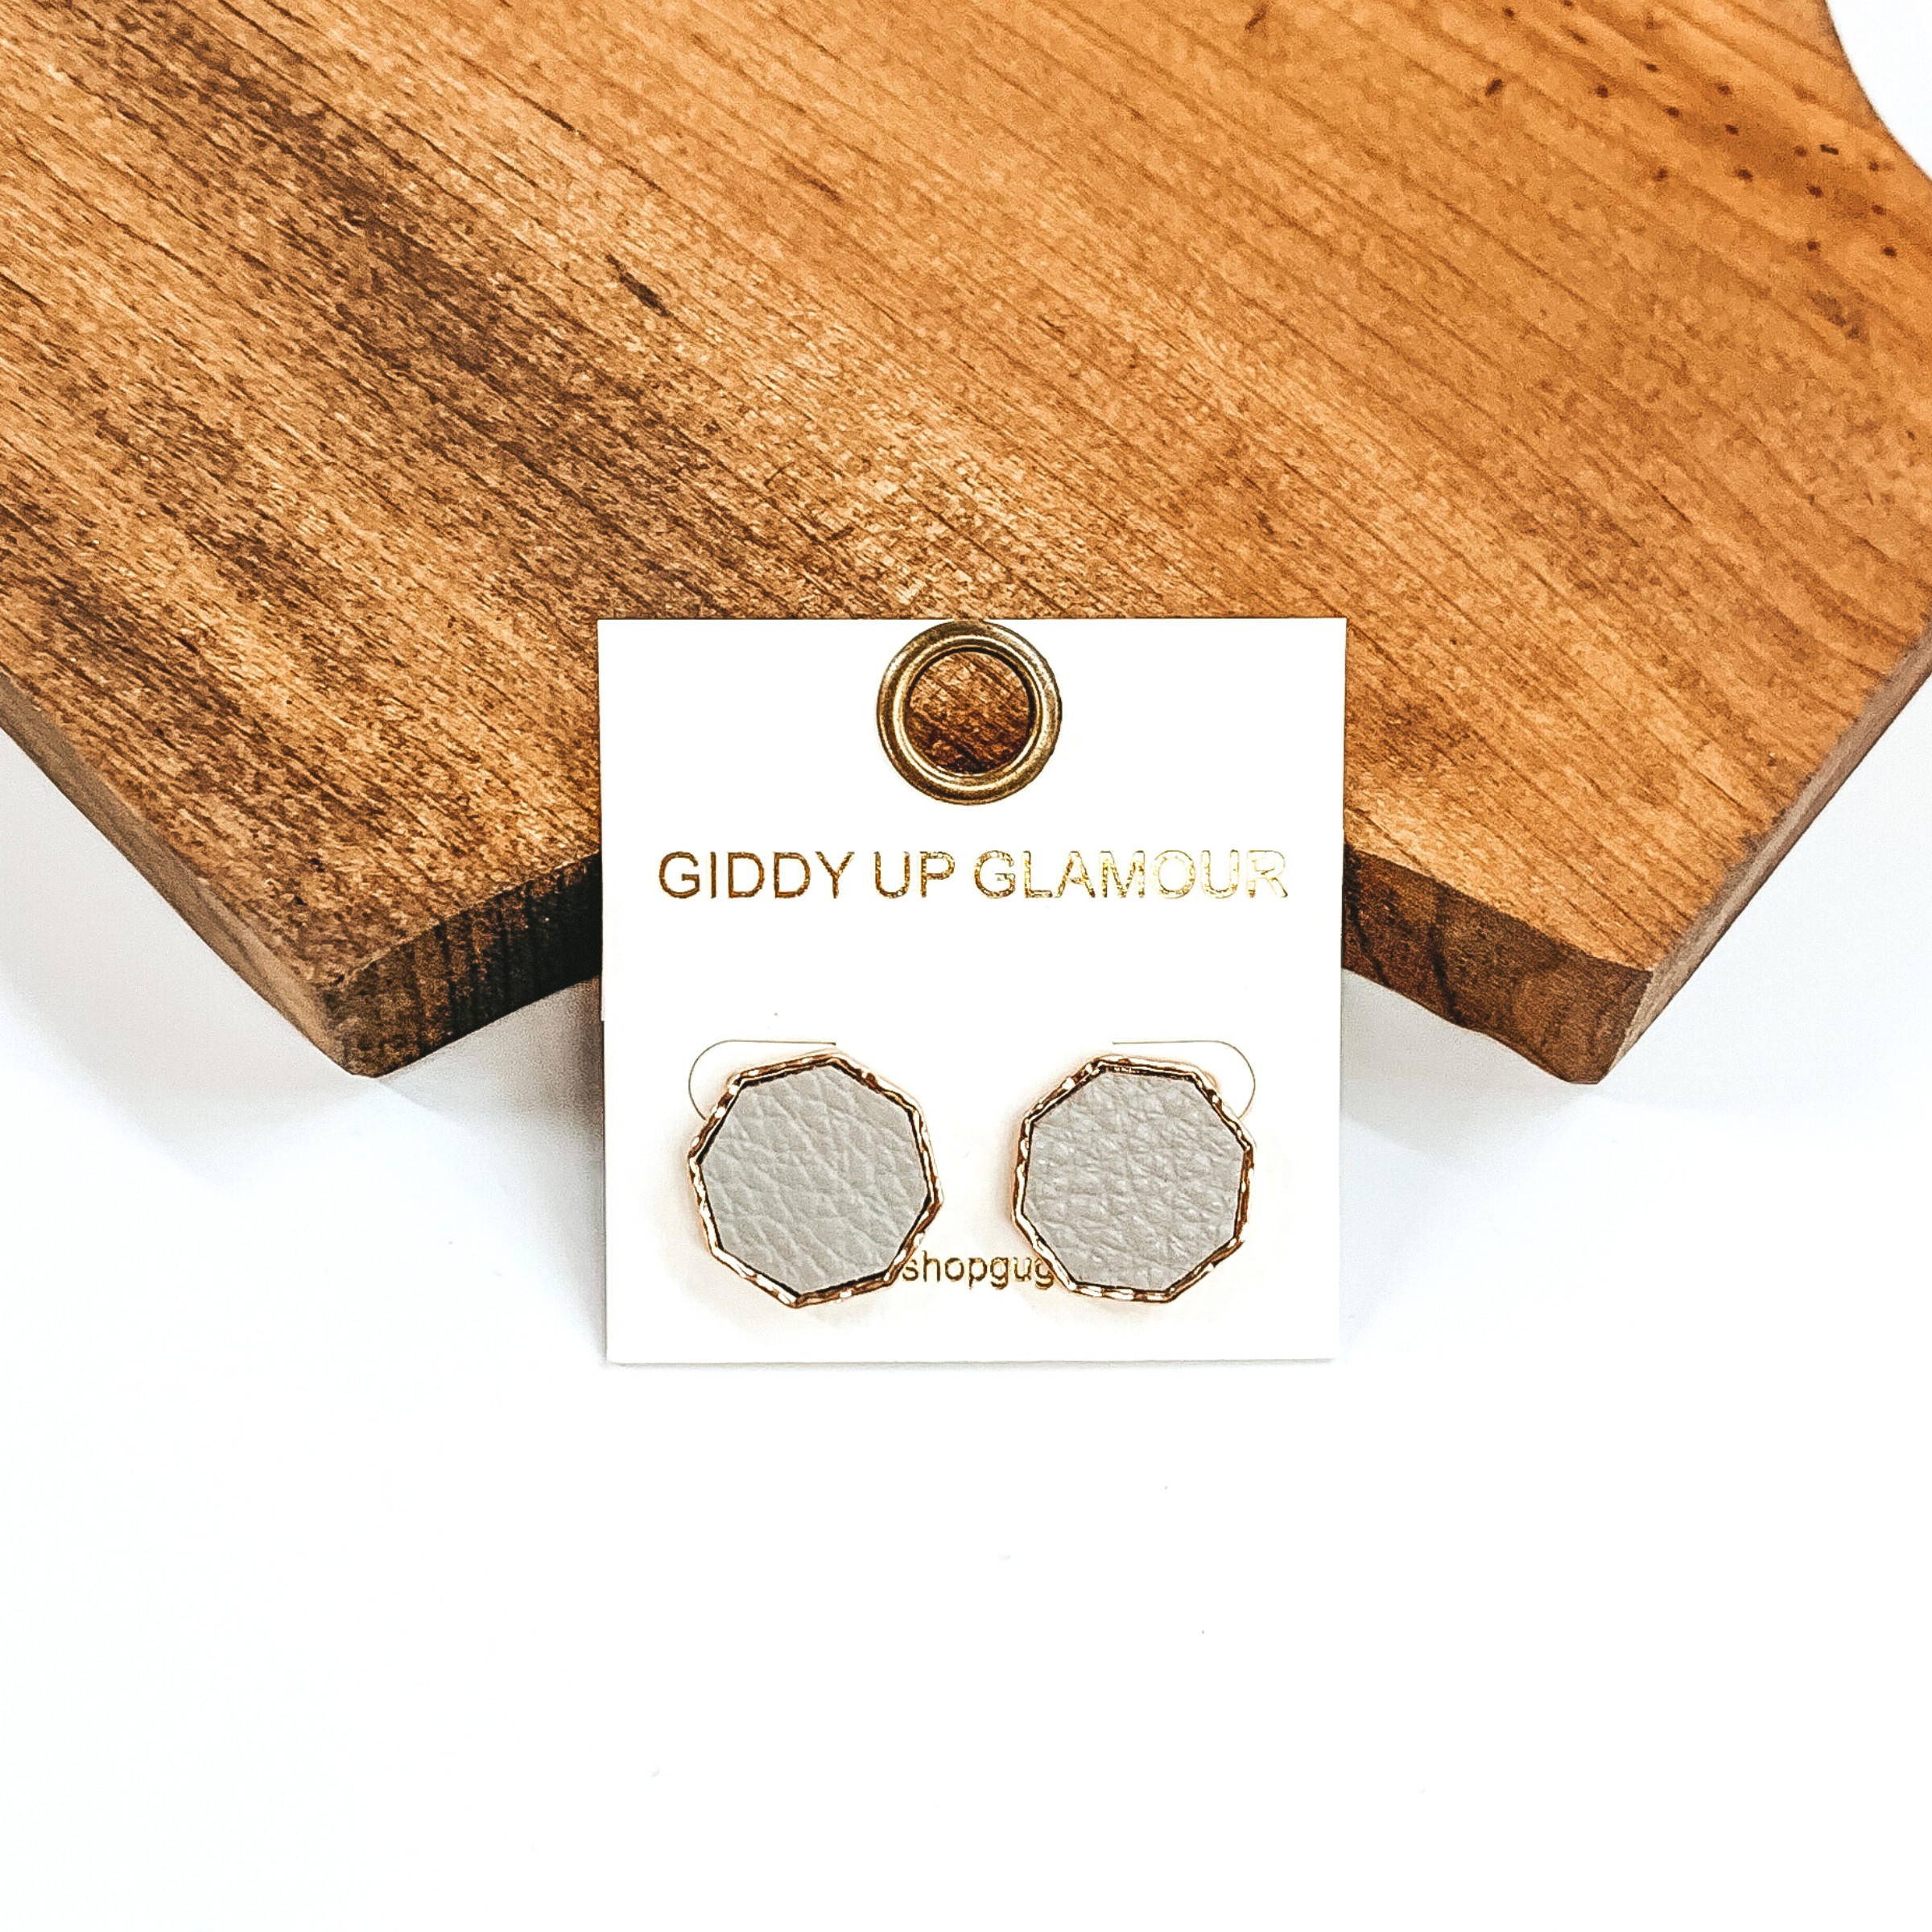 Gold, hexagon stud earrings with an grey leather like inlay. Pictured on a white background in front of a piece of wood.